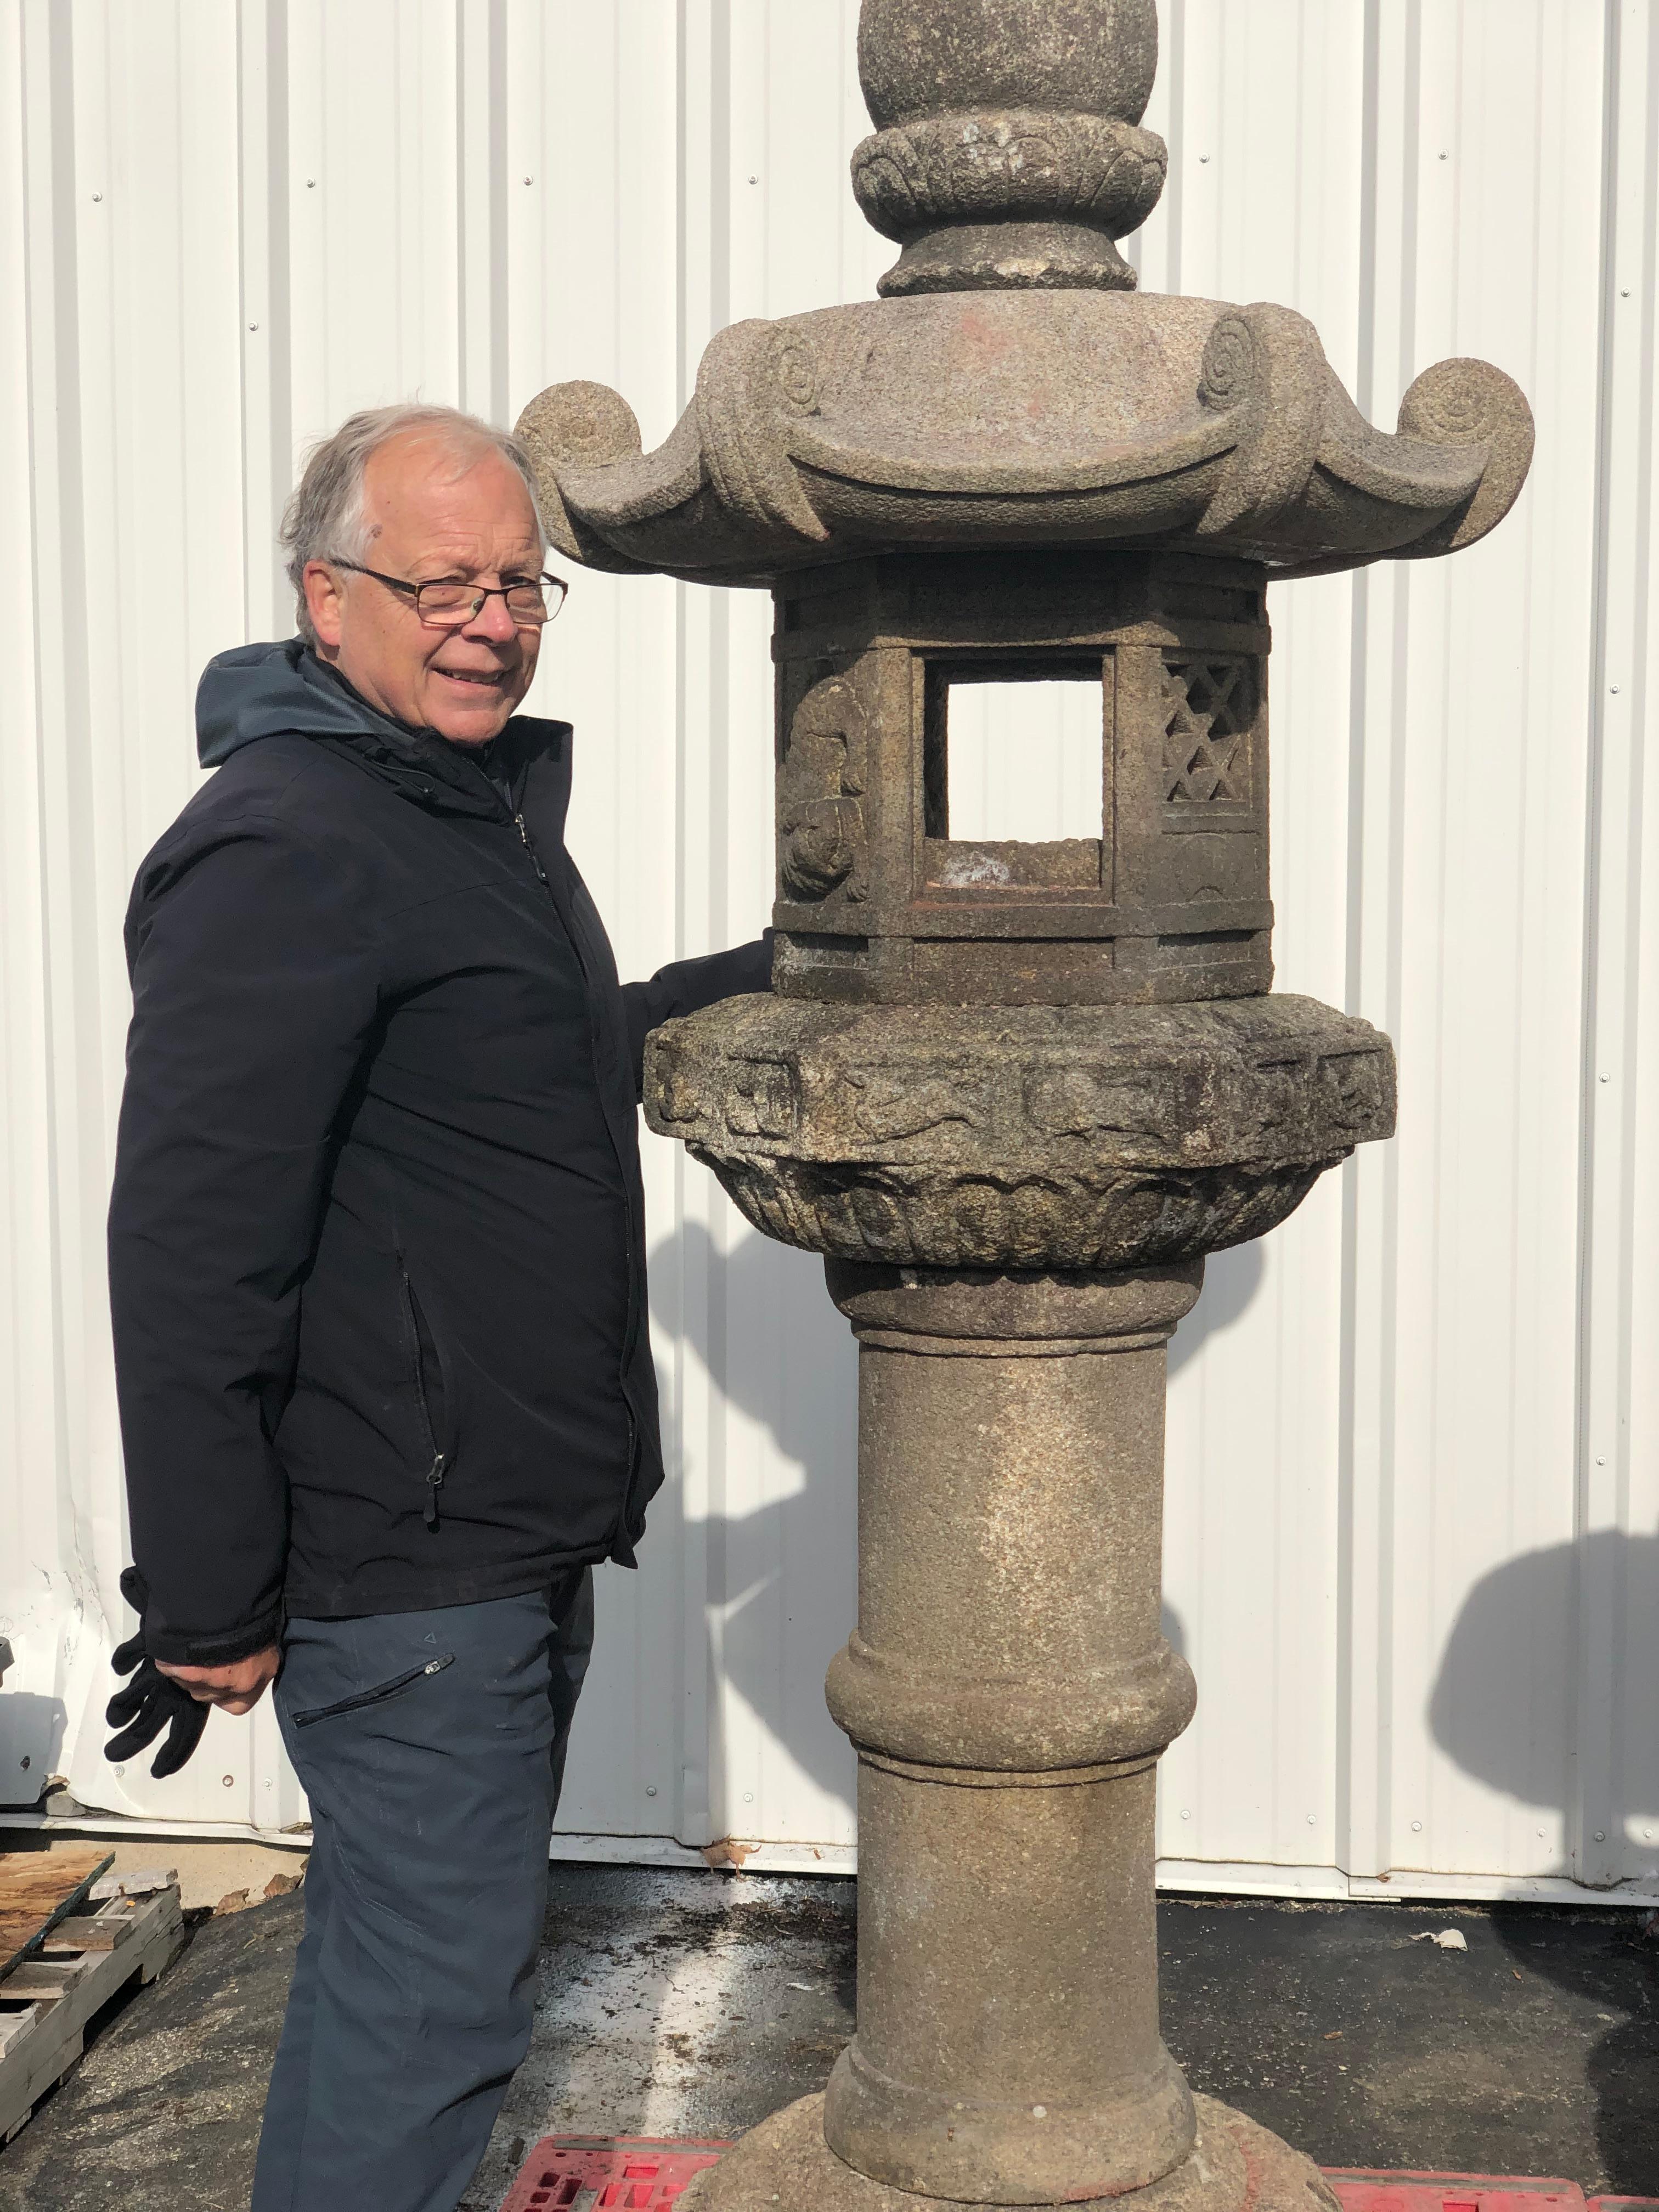 A tall 84 inch  antique depicting the 12 signs of zodiac

Japan, a fine tall kasuga granite stone lantern with a beautifully carved lotus top with a rare band of 12 engraved animal zodiac designs. Completing this unusual one-of-a-kind lantern is a